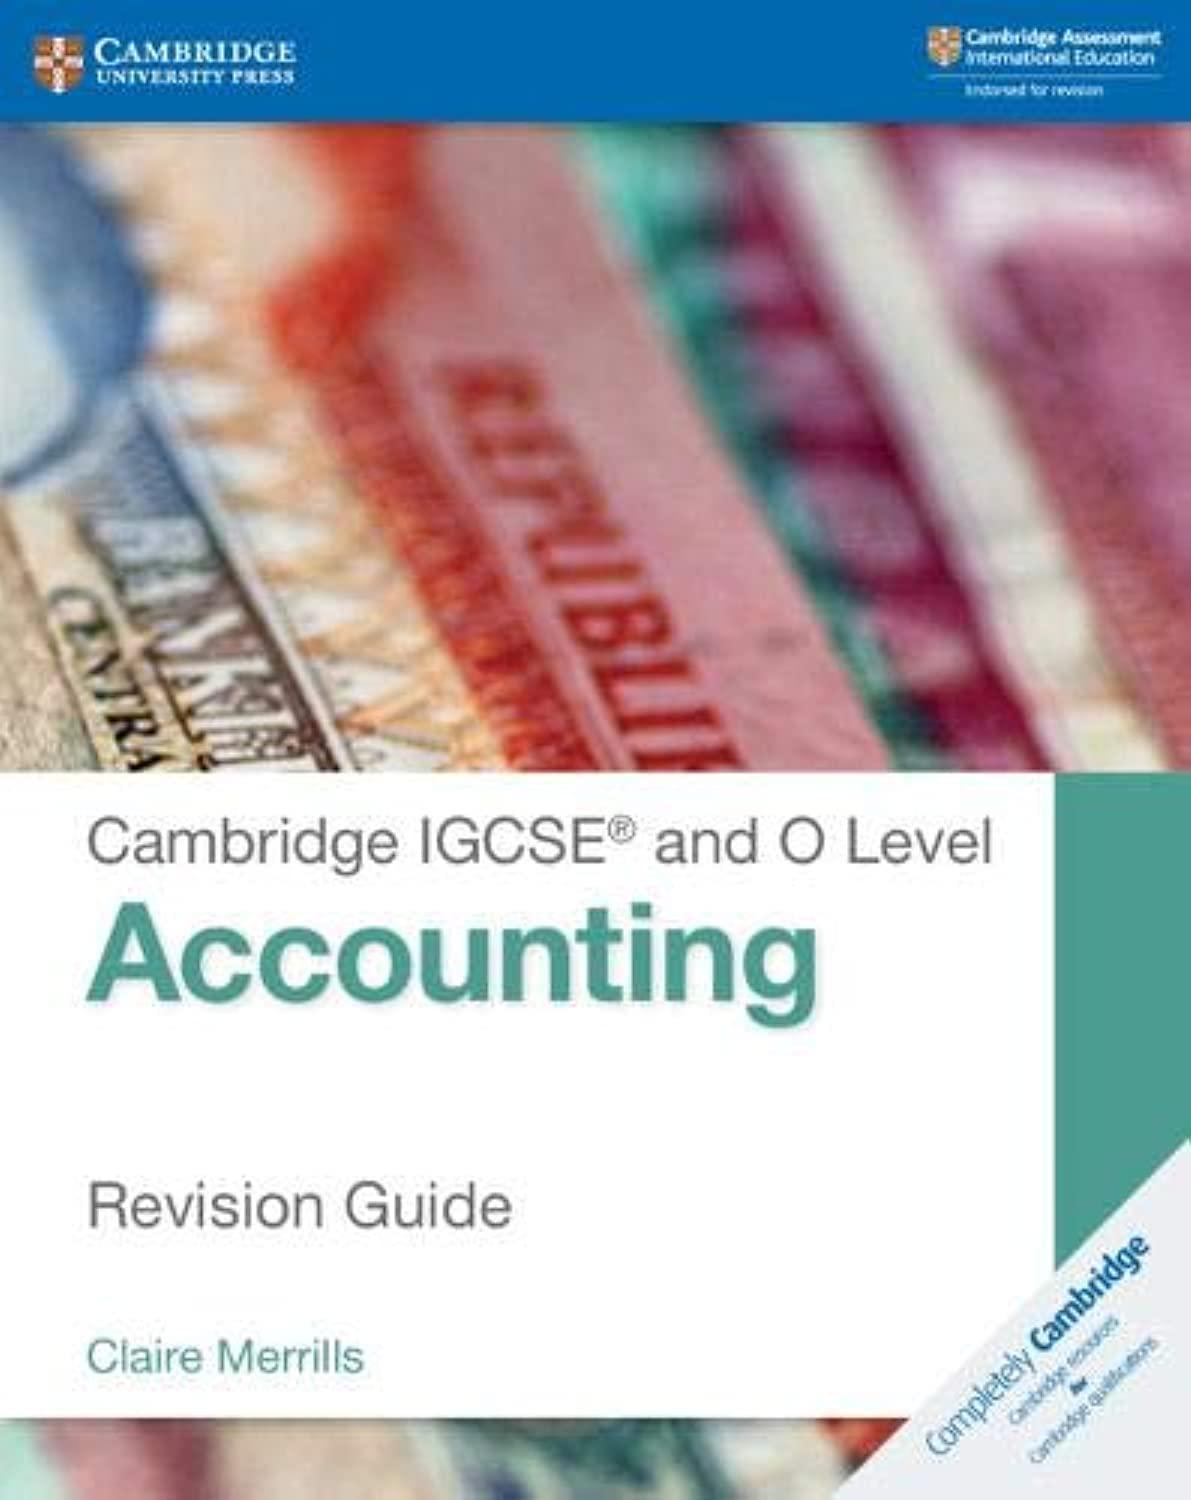 cambridge igcse and o level accounting revision guide 2nd edition claire merrills 1108436994, 978-1108436991